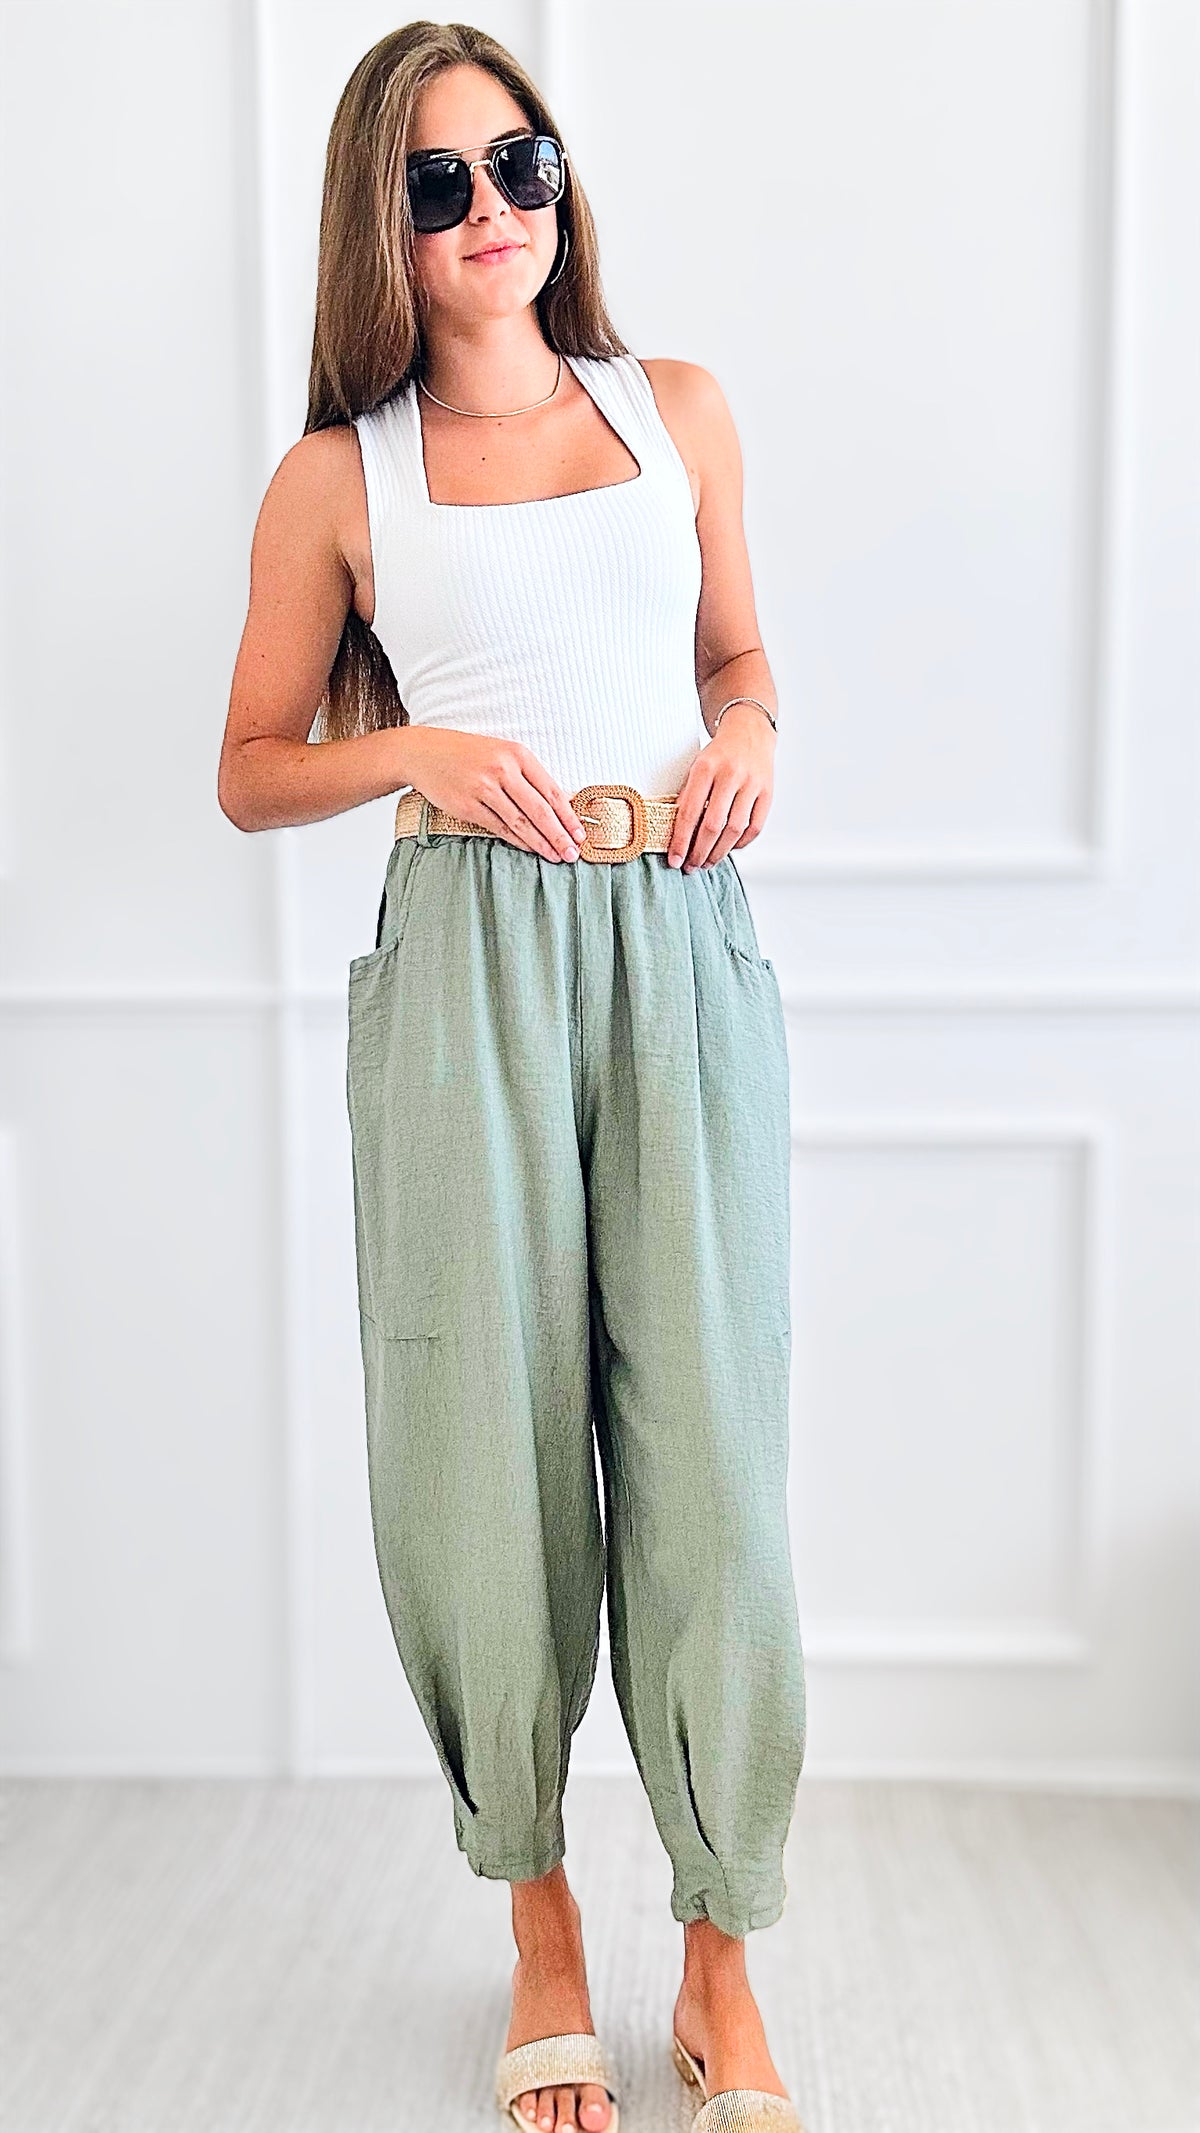 Patagonia Italian Pants - Sage-pants-Italianissimo-Coastal Bloom Boutique, find the trendiest versions of the popular styles and looks Located in Indialantic, FL